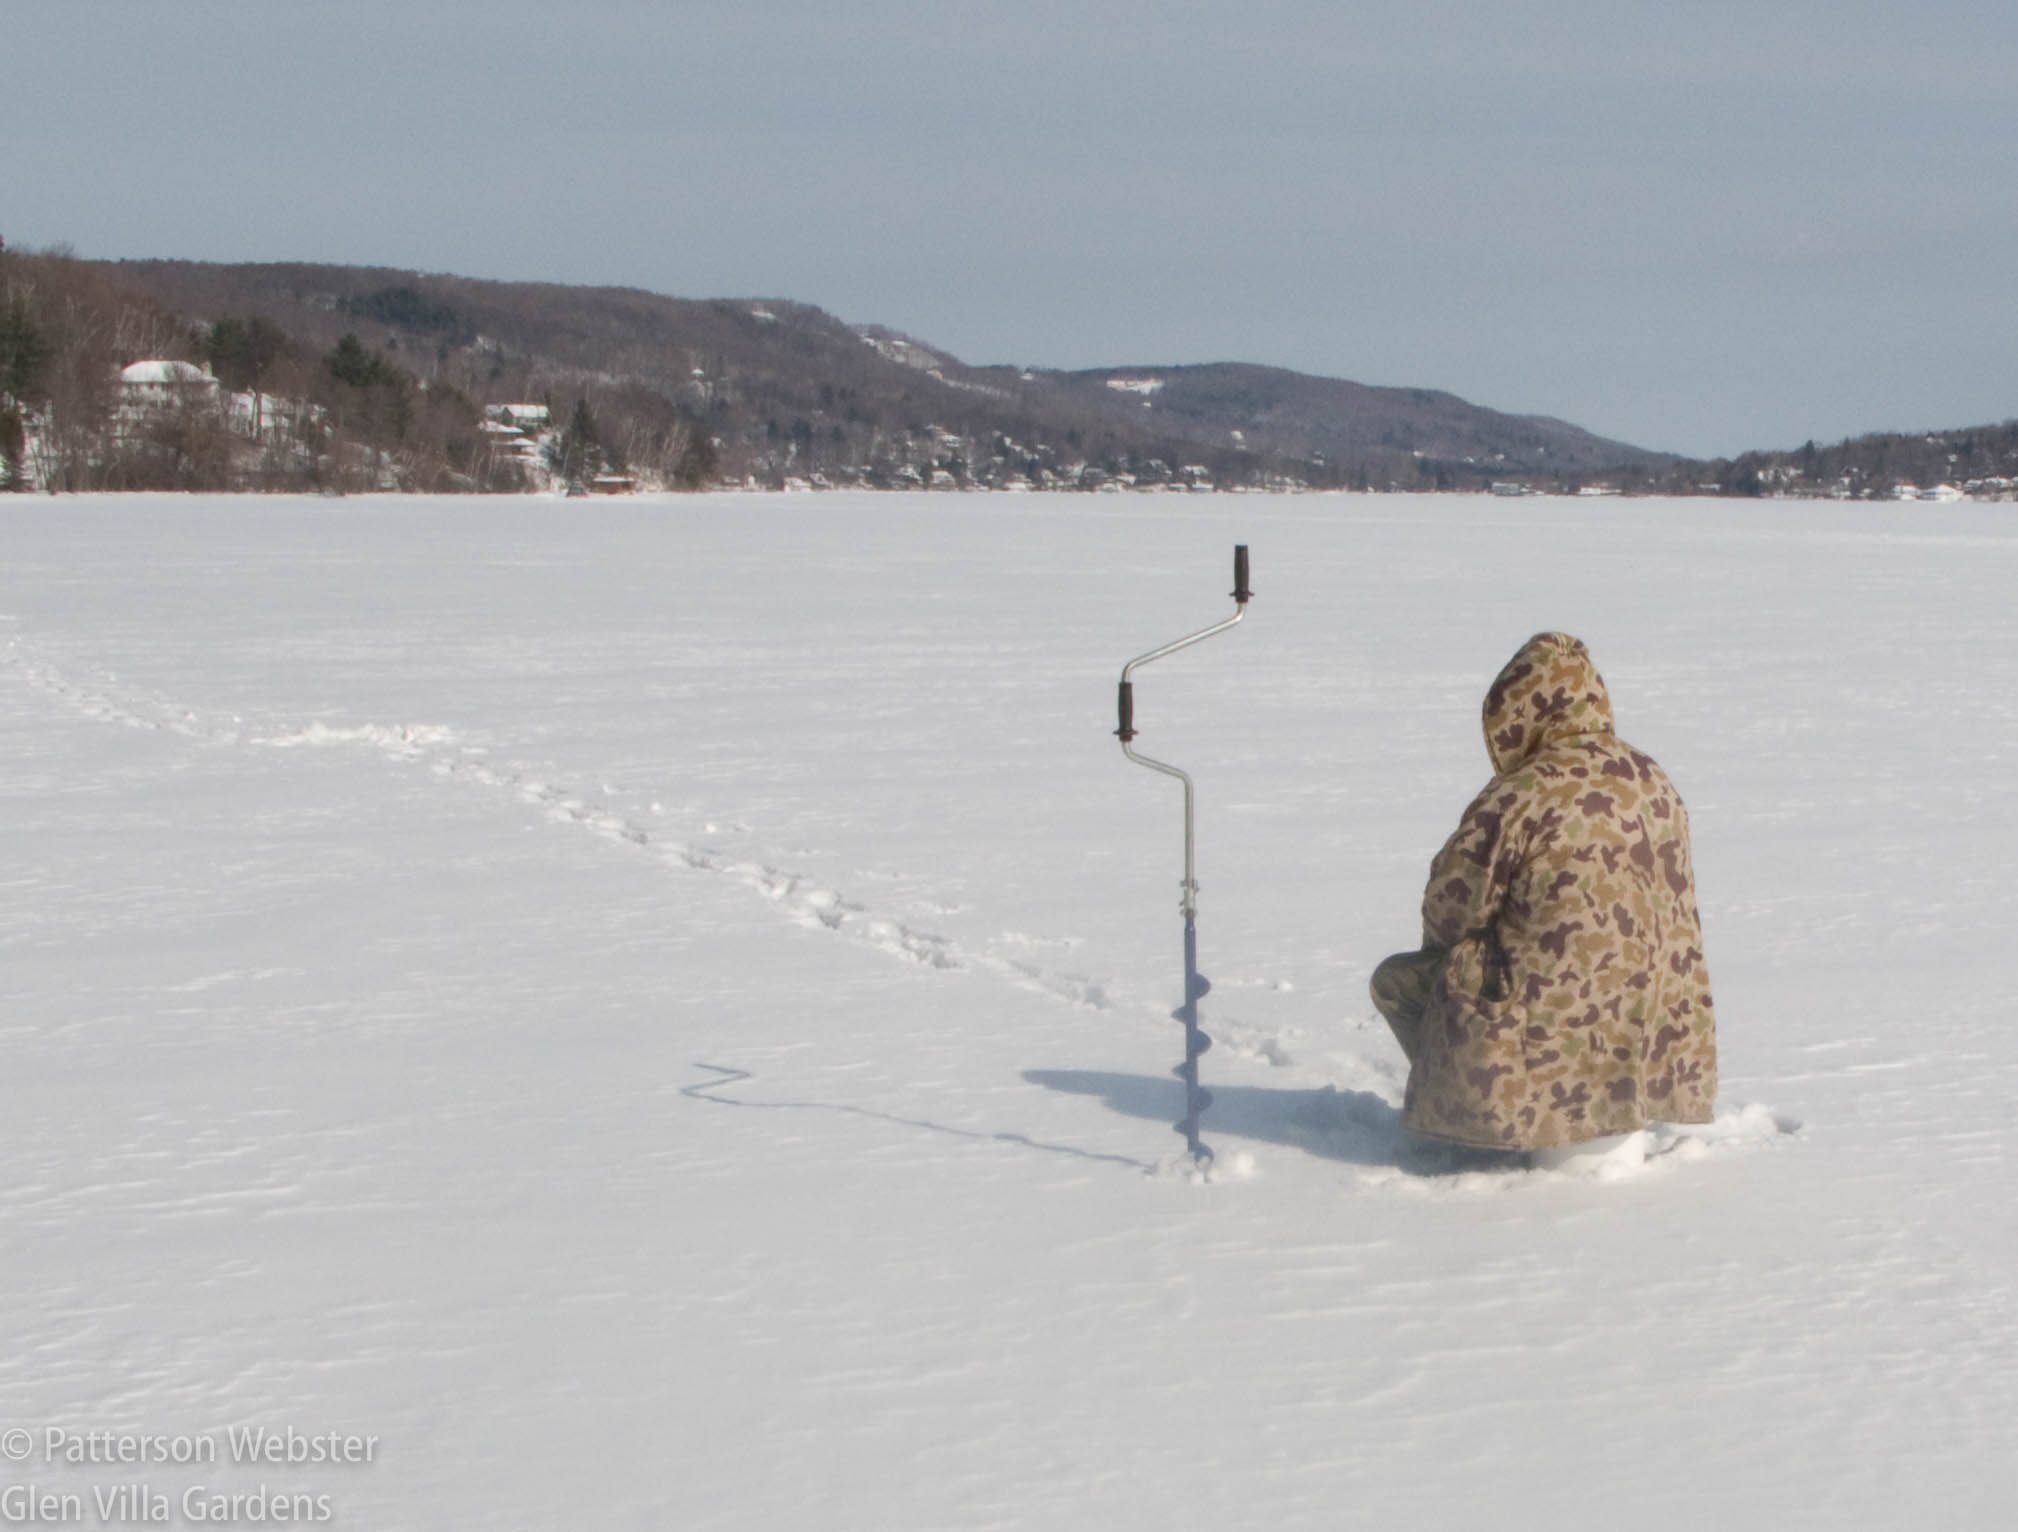 Sometimes a fish will take the bait quickly but more often Ice fishing takes patience.